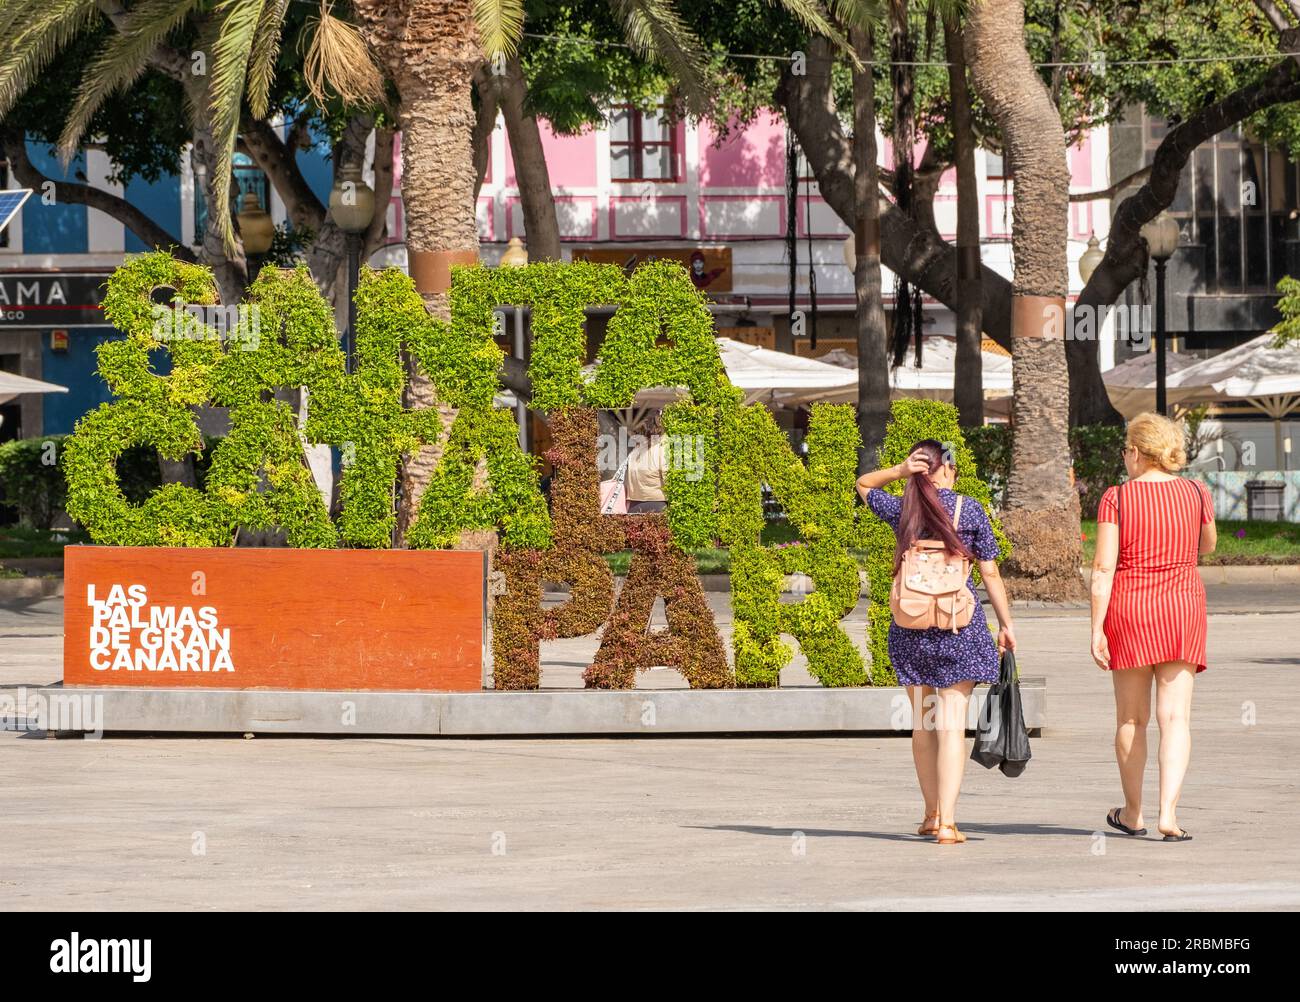 Gran Canaria, Canary Islands, Spain. 10th July 2023. Tourists, many from the UK, arriving in Las Palmas, the capital of Gran Canaria. An air traffic control strike could hit summer holiday flights across Europe. Credit: Alan Dawson/Alamy Live News. Stock Photo